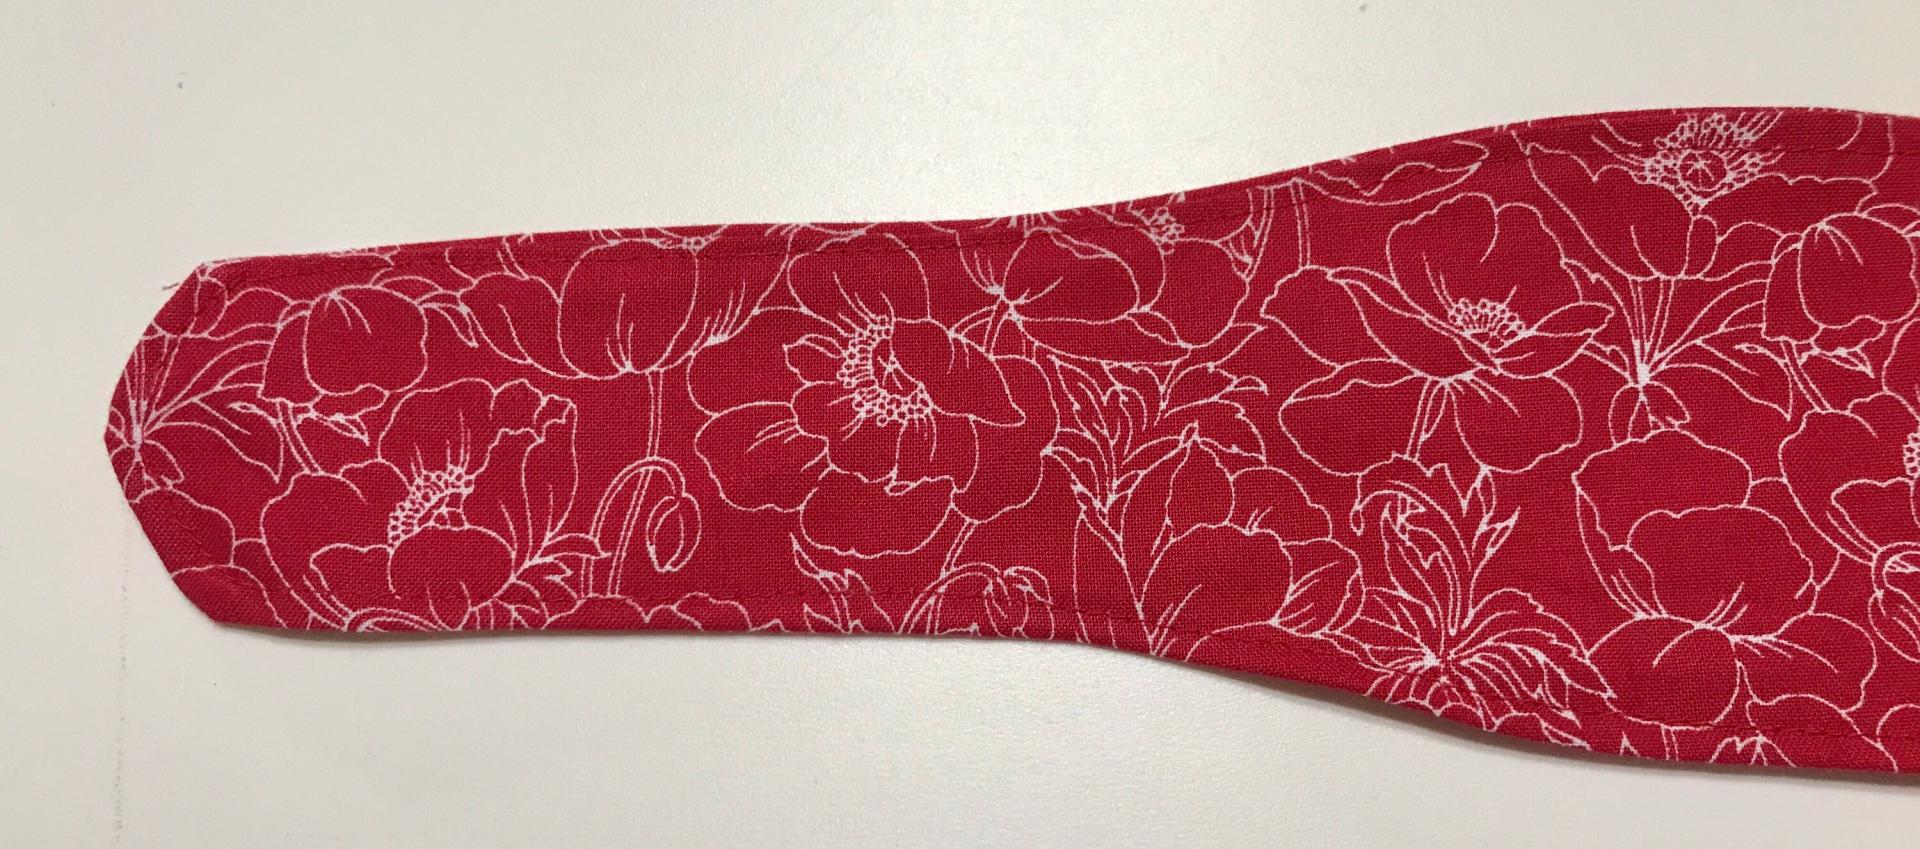 3” Wide Poppies Floral headband, self tie, hair wrap, pin up style, hair tie, retro style, rockabilly, scarf